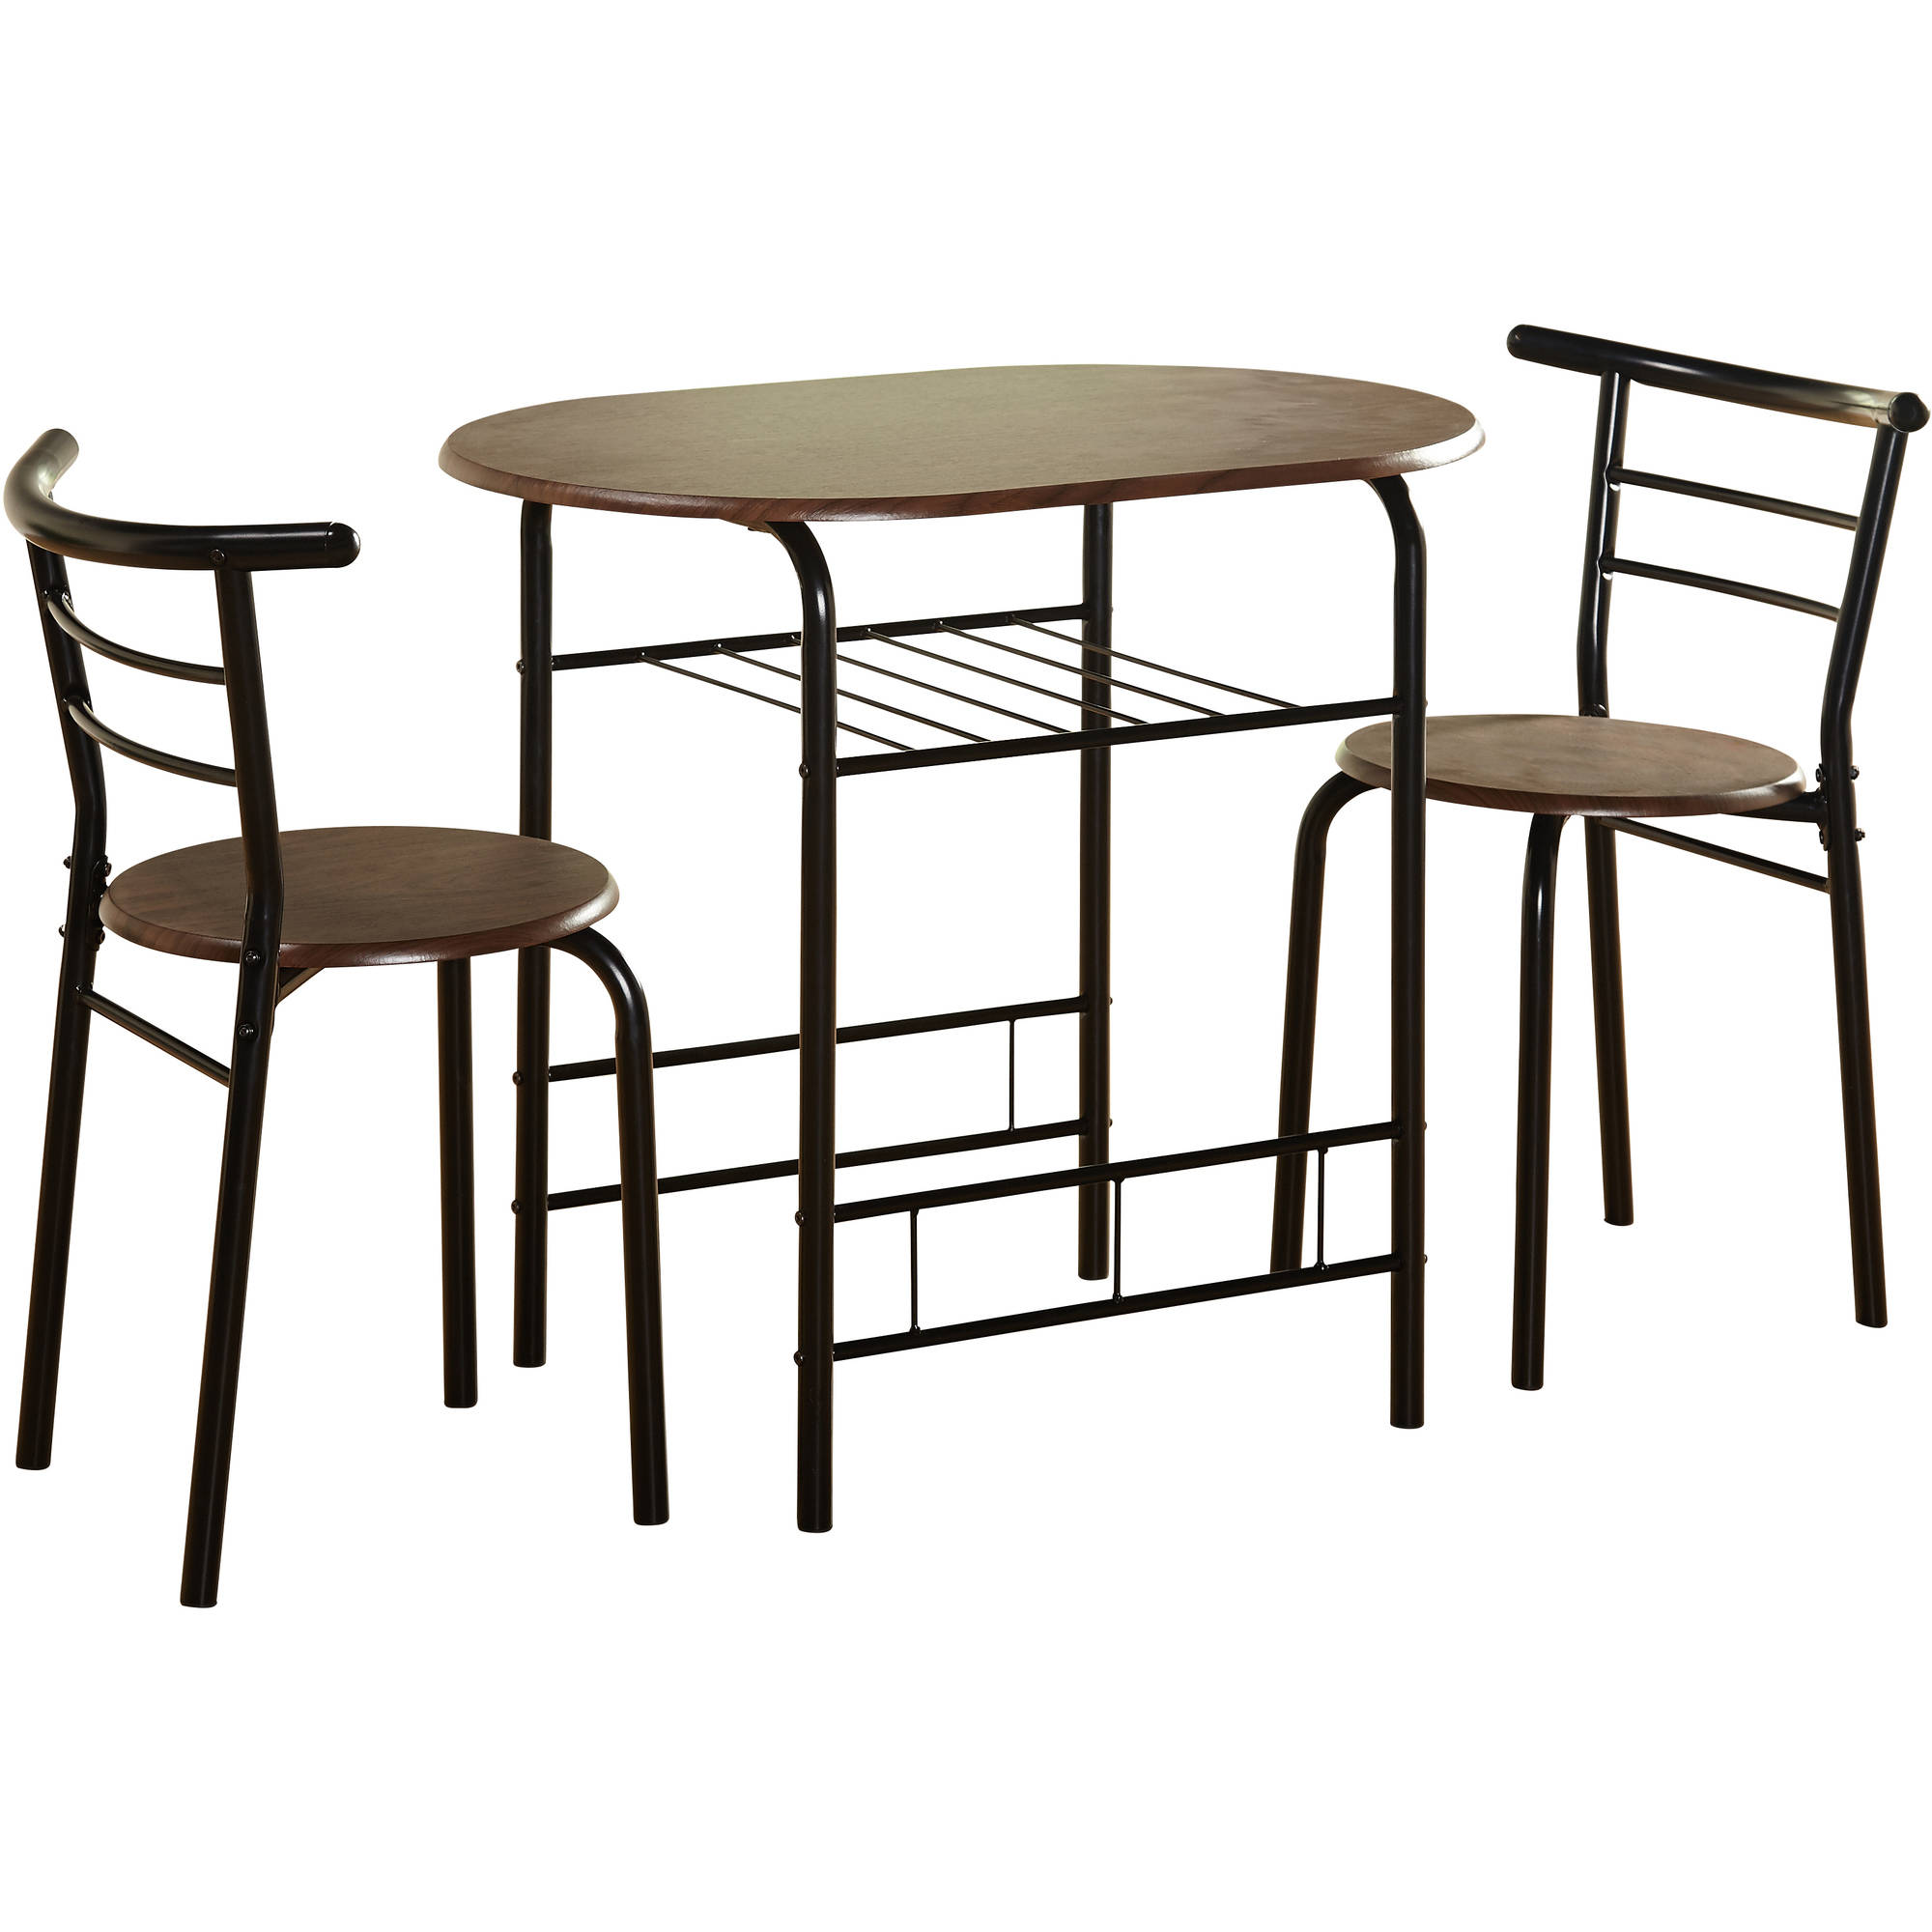 Target Marketing Systems 3 - Piece Bistro Dining Set - image 4 of 5